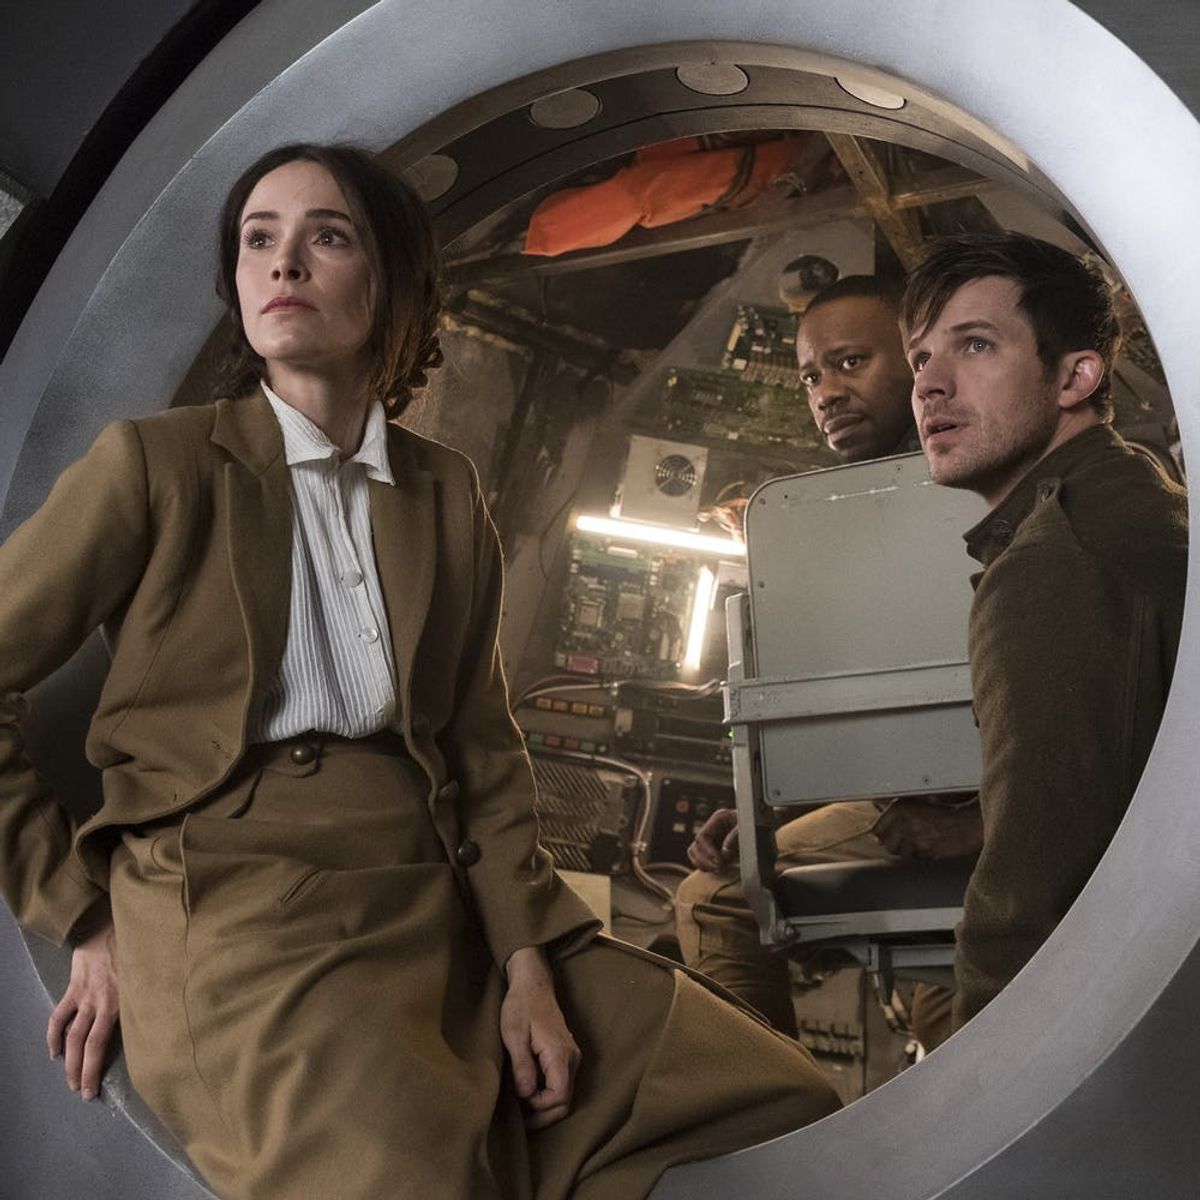 The ‘Timeless’ Season 2 Trailer Teases a Big Moment for Lucy and Wyatt